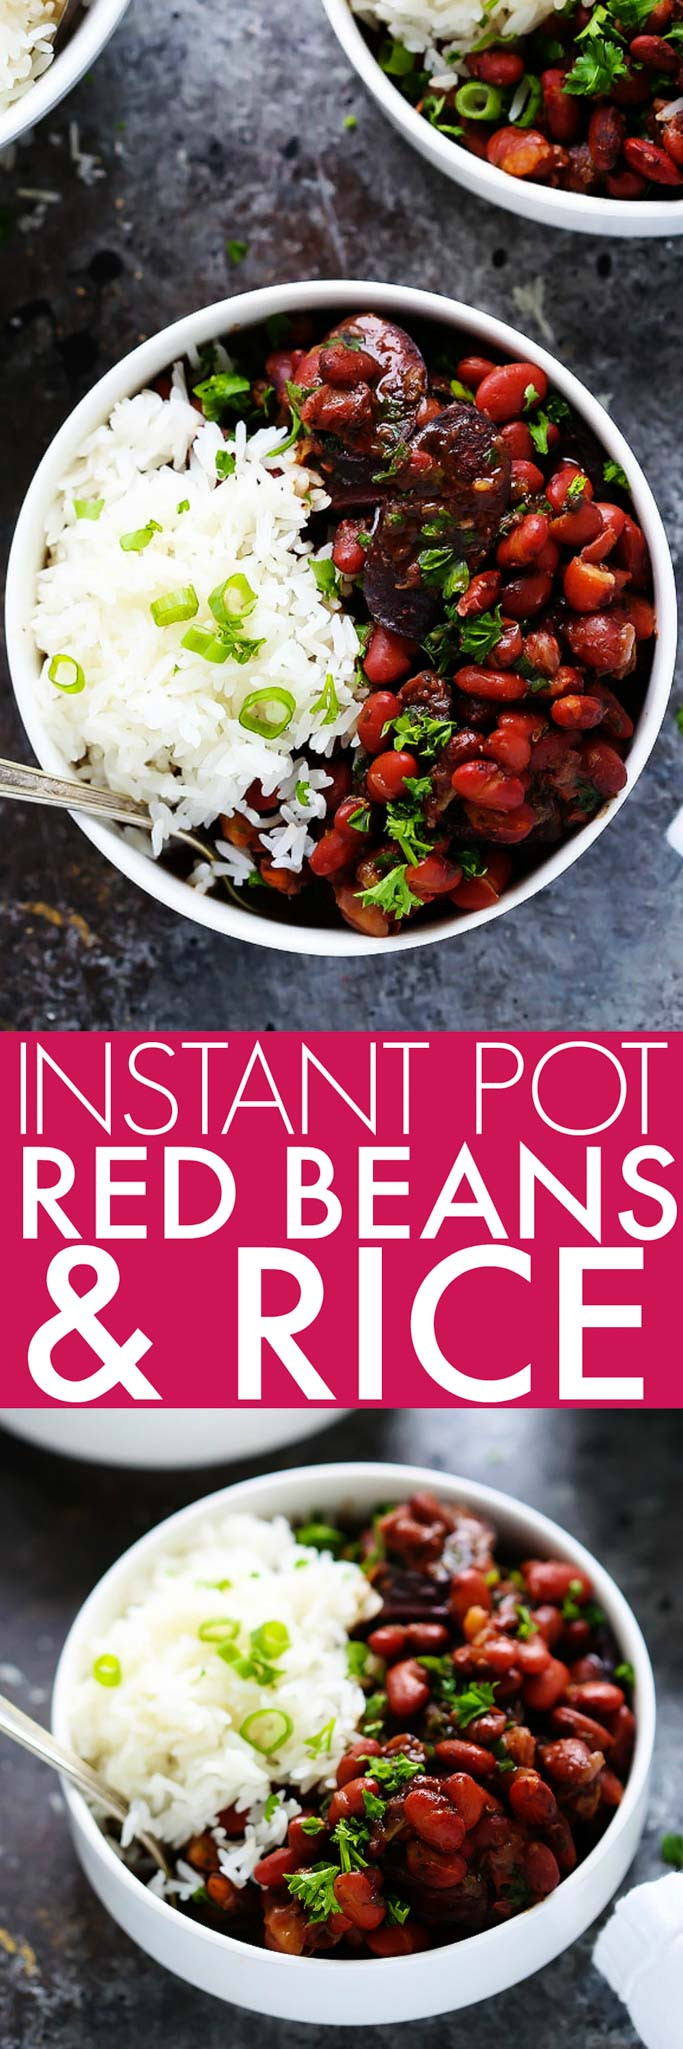 Instant Pot Black Beans And Rice
 Instant Pot Red Beans & Rice